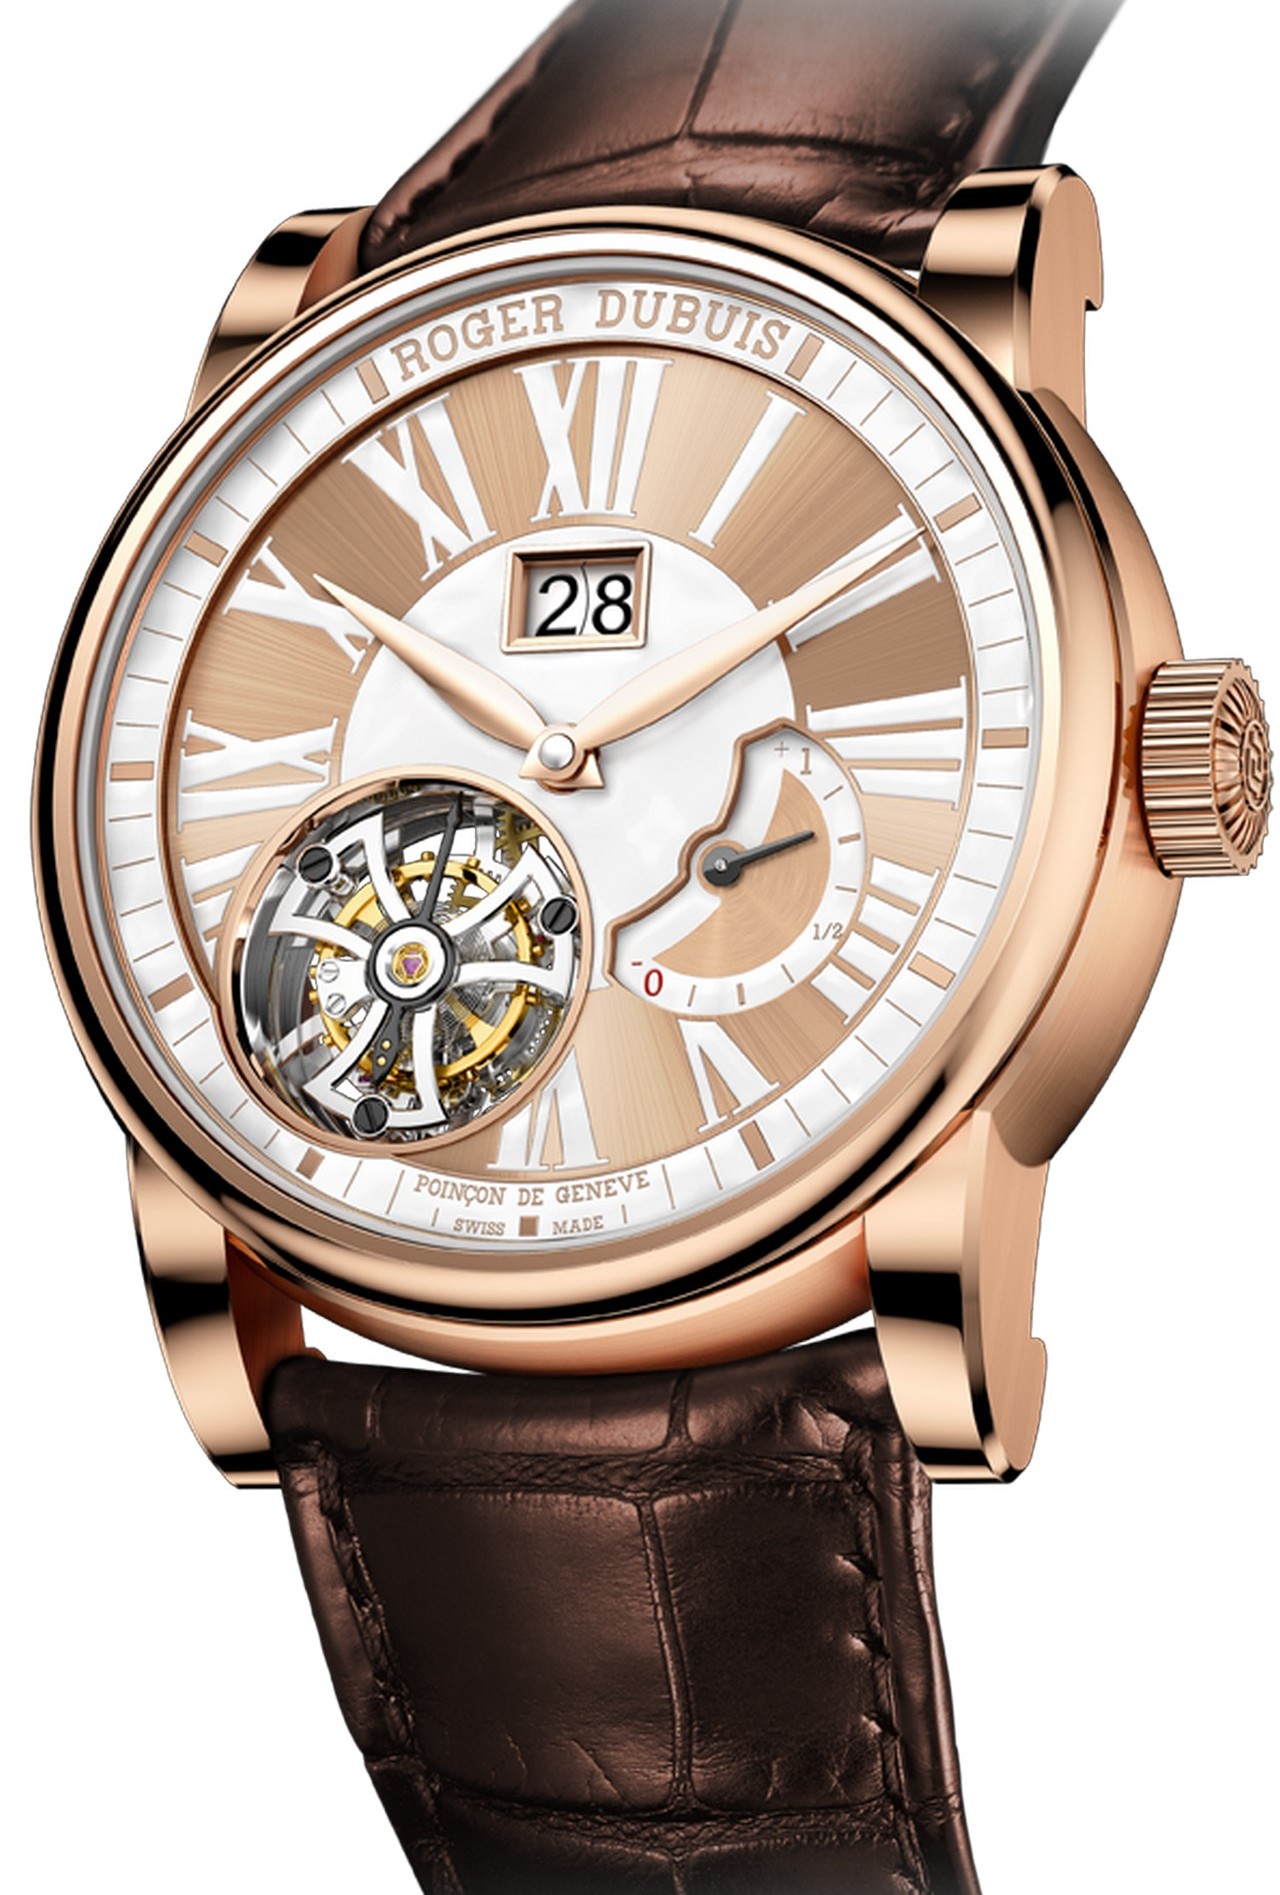 RDDBHO0568 Roger Dubuis Hommage Collection